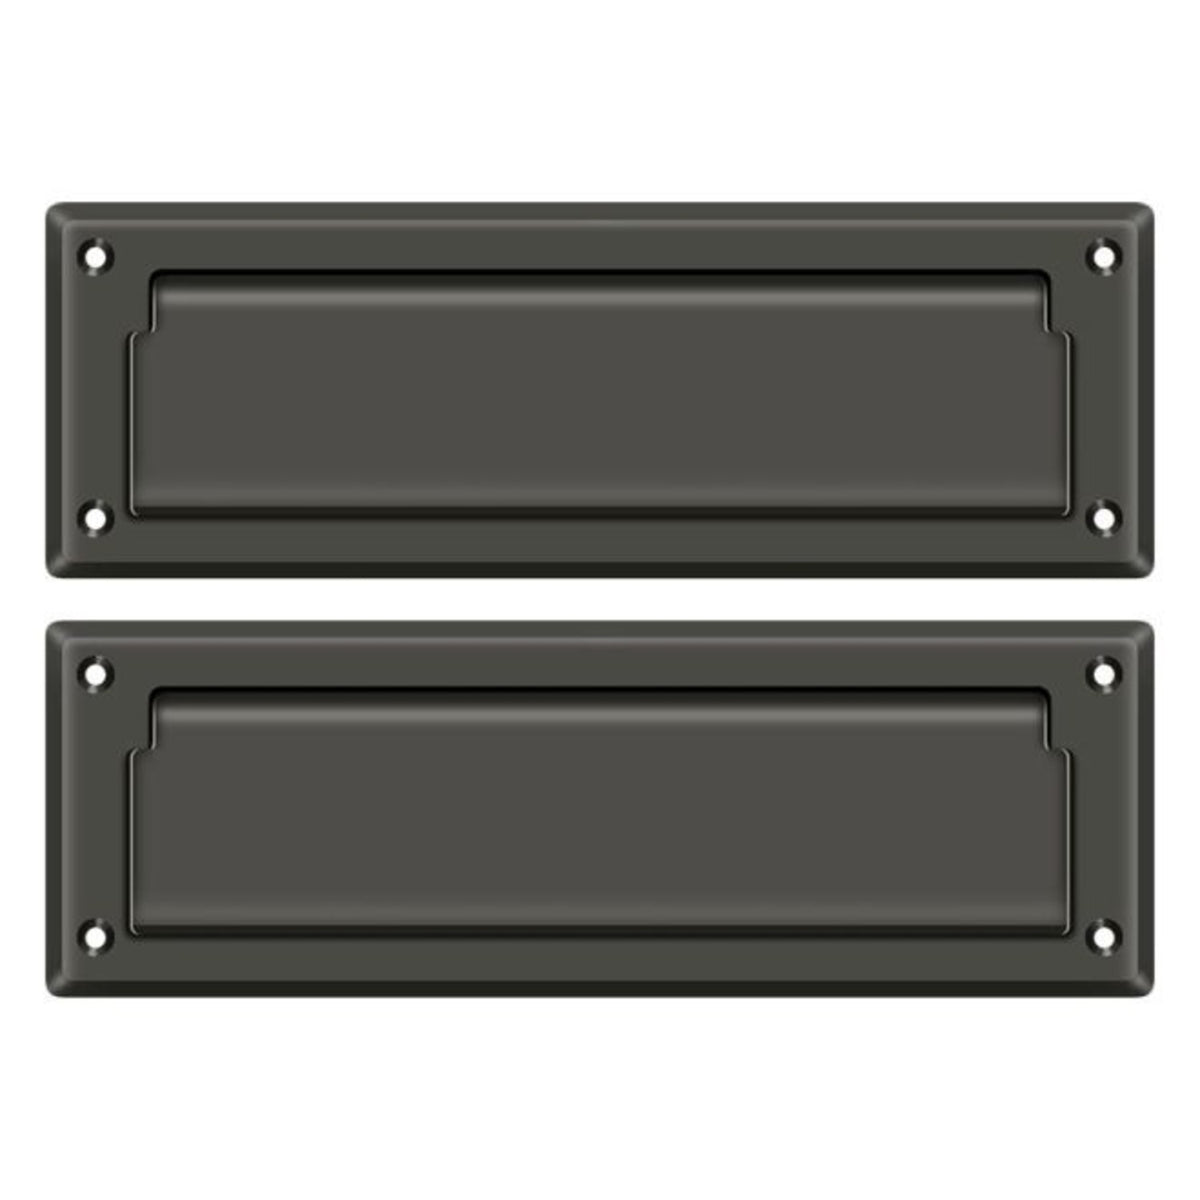 Deltana MS627U10B Mail Slot With Back Plate, Oil Rubbed Bronze